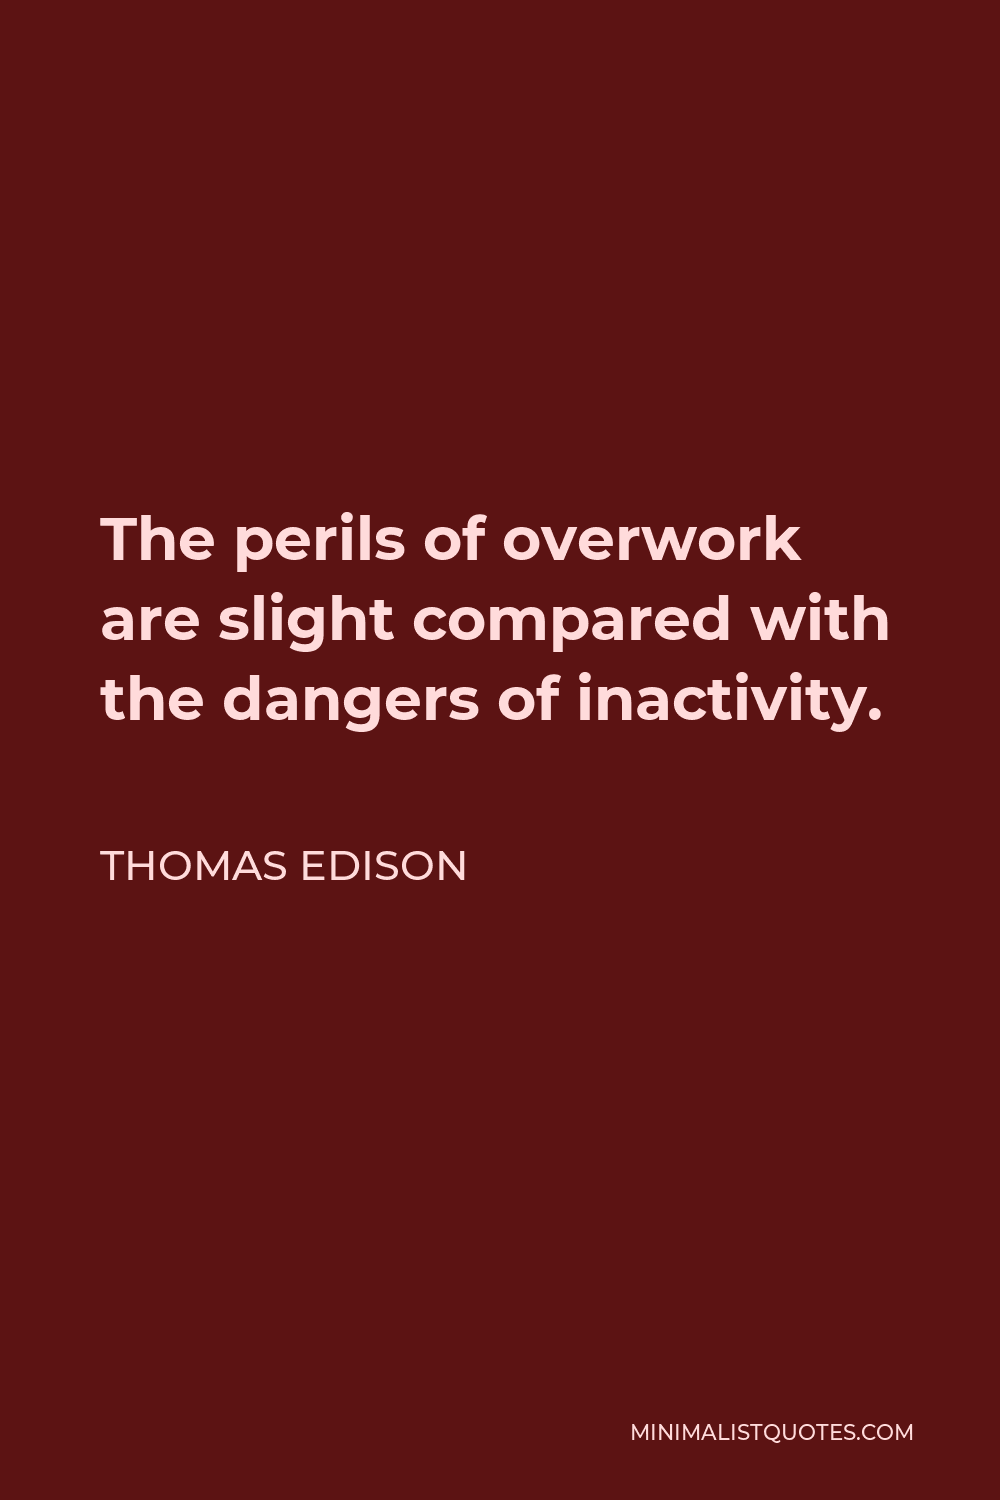 Thomas Edison Quote - The perils of overwork are slight compared with the dangers of inactivity.